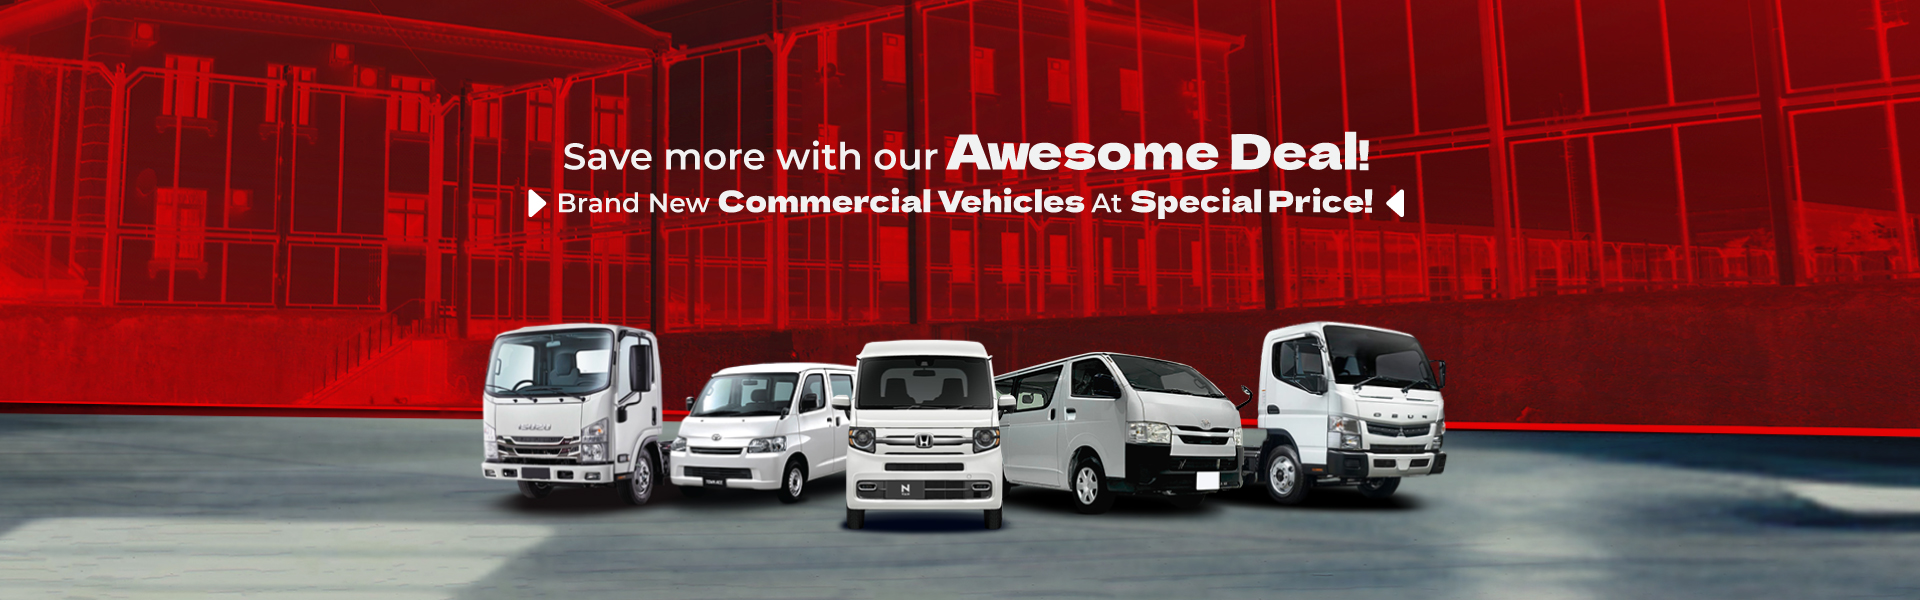 Brand New Commercial Vehicles in Singapore